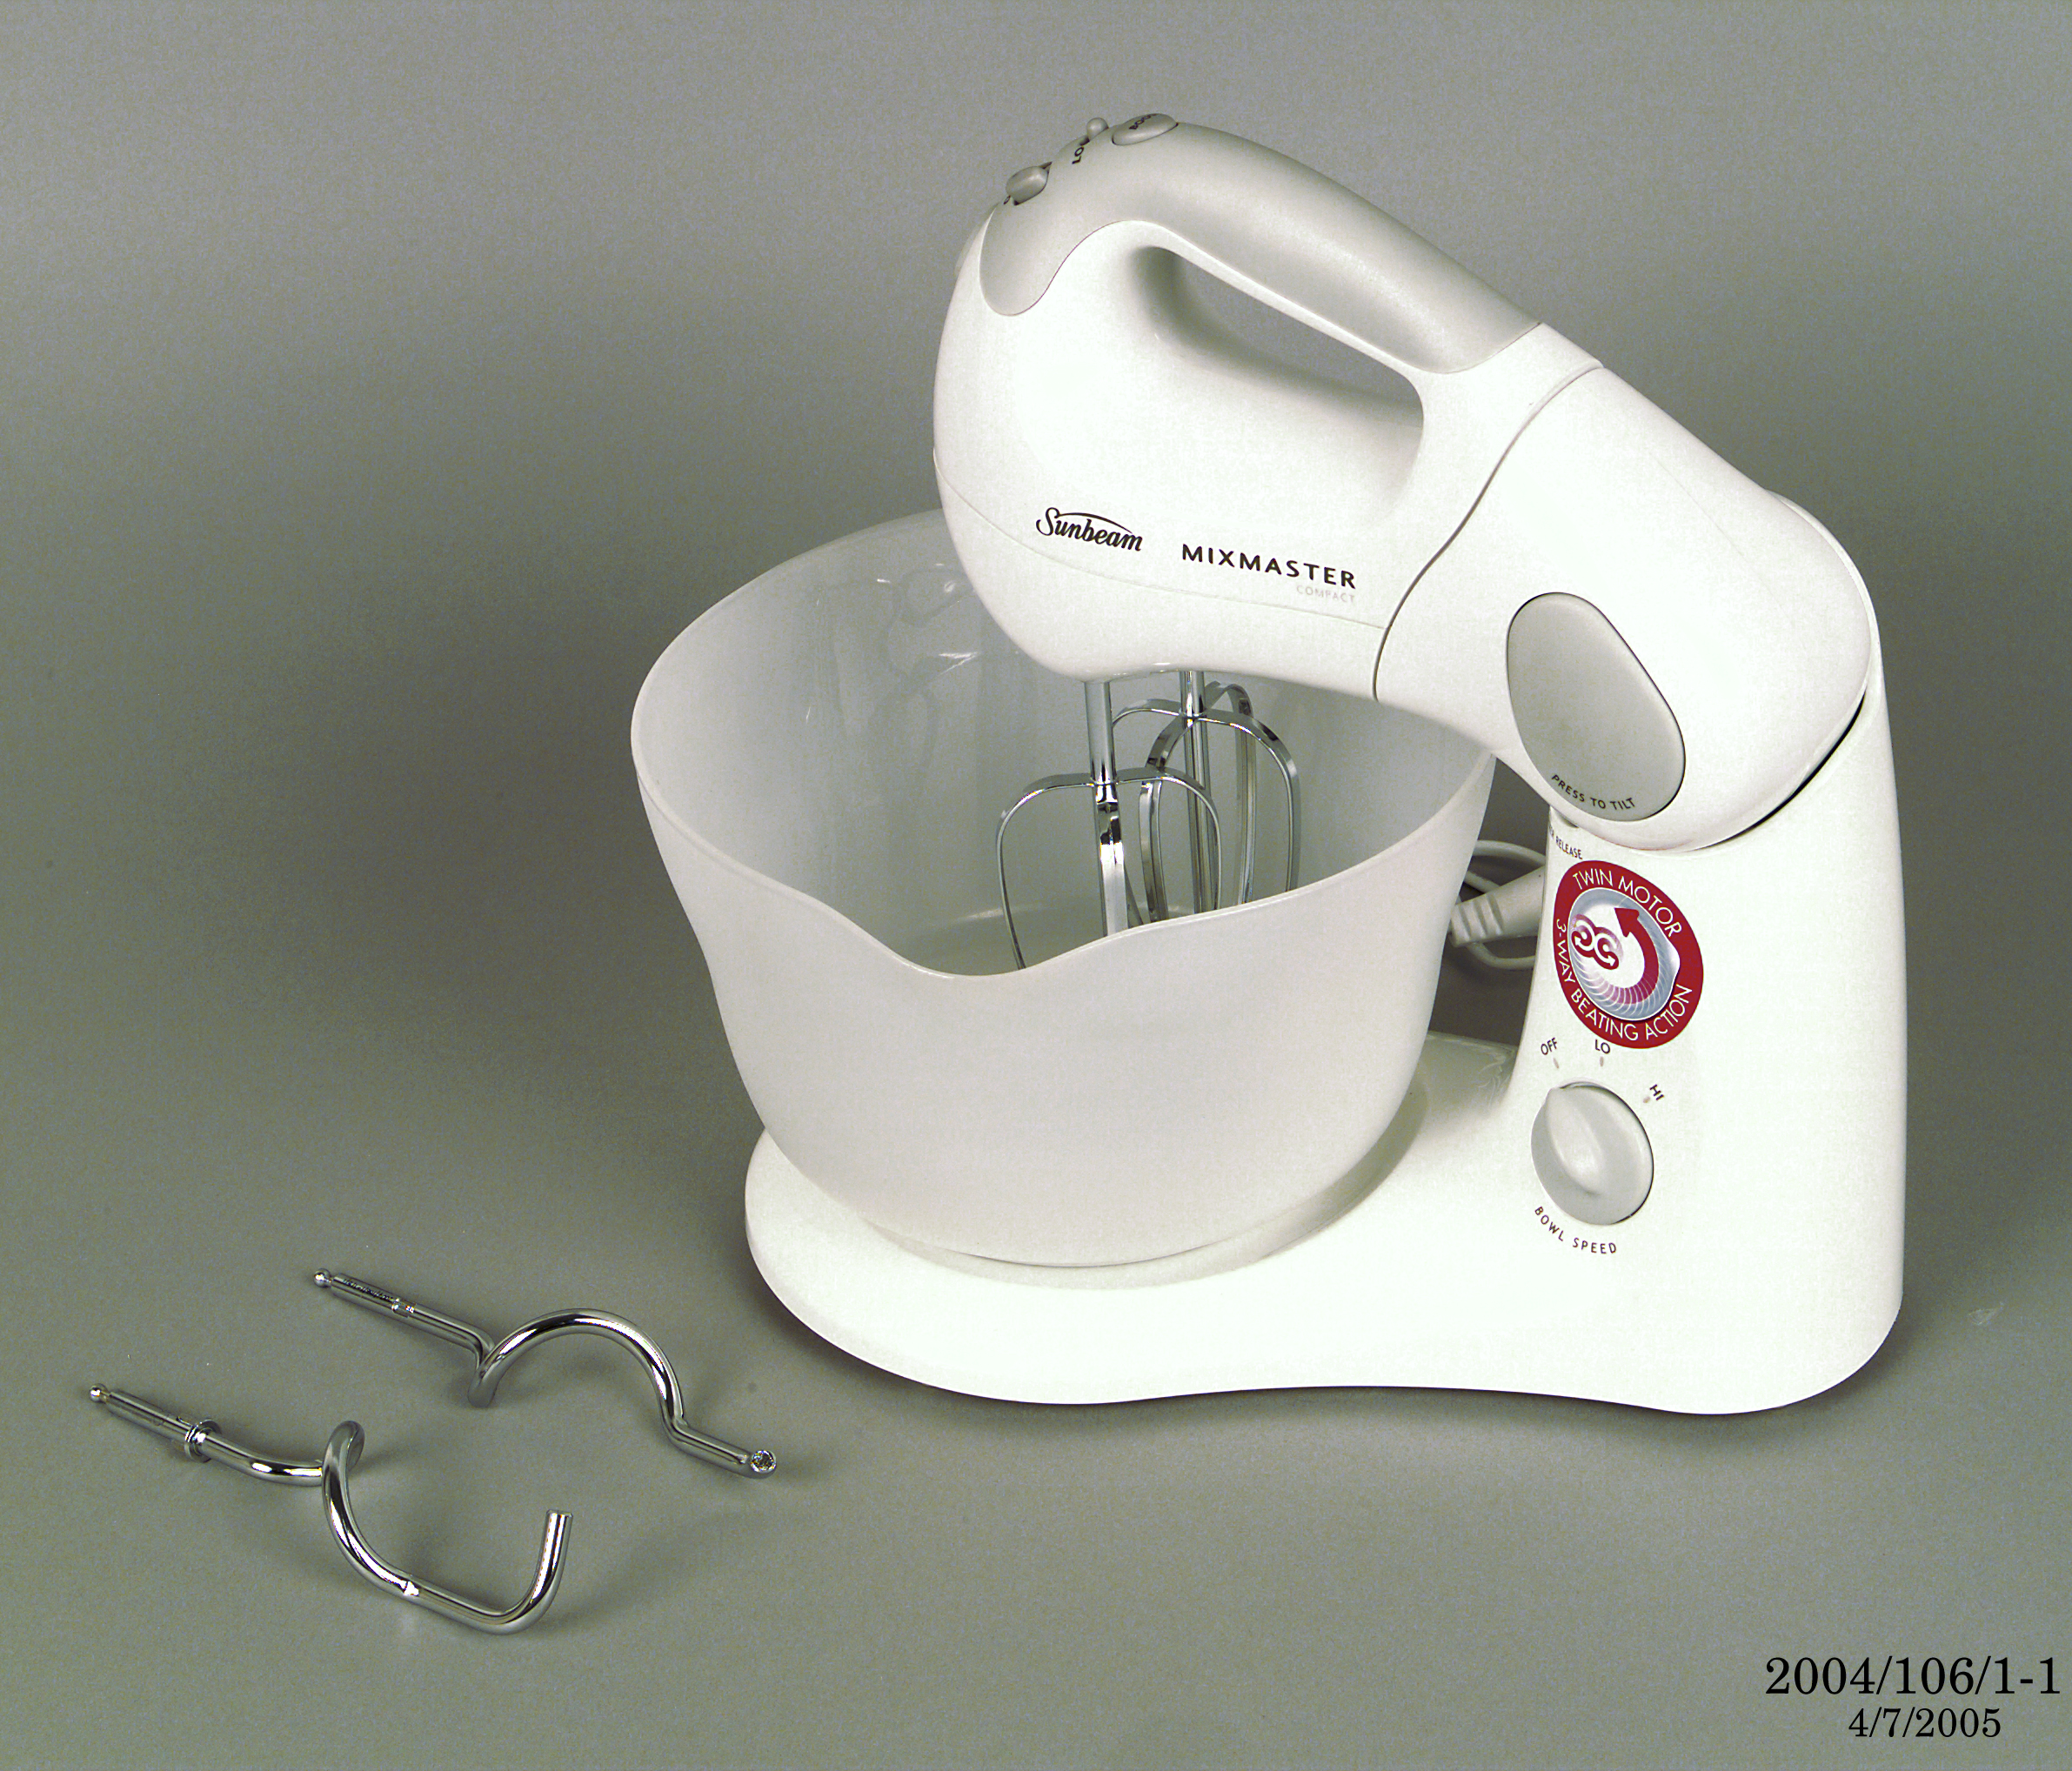 Powerhouse Collection - Sunbeam 'Mixmaster Compact' food mixer and  accessories